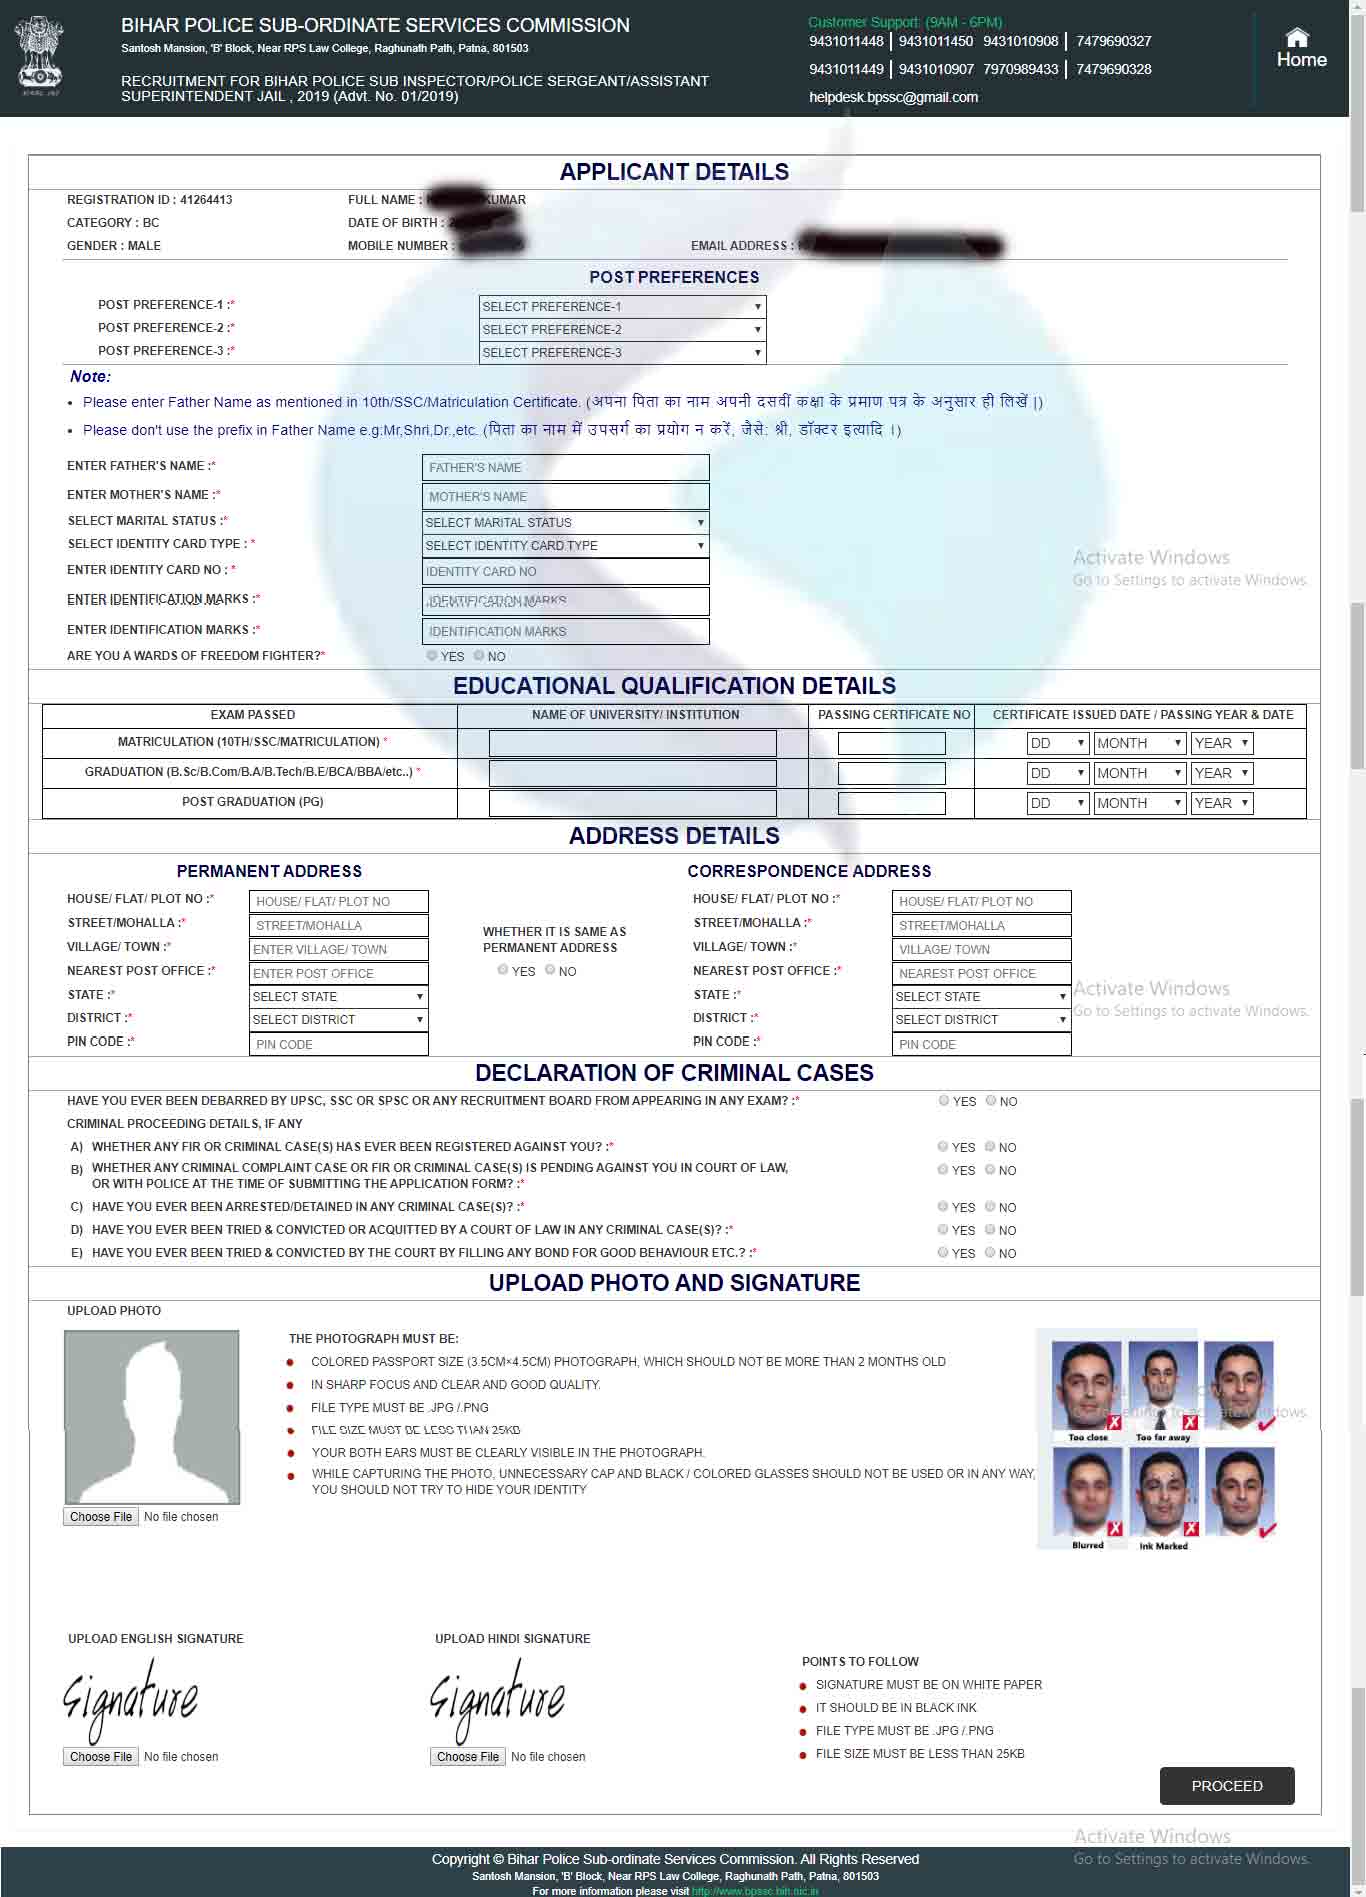 bpssc form fill up 